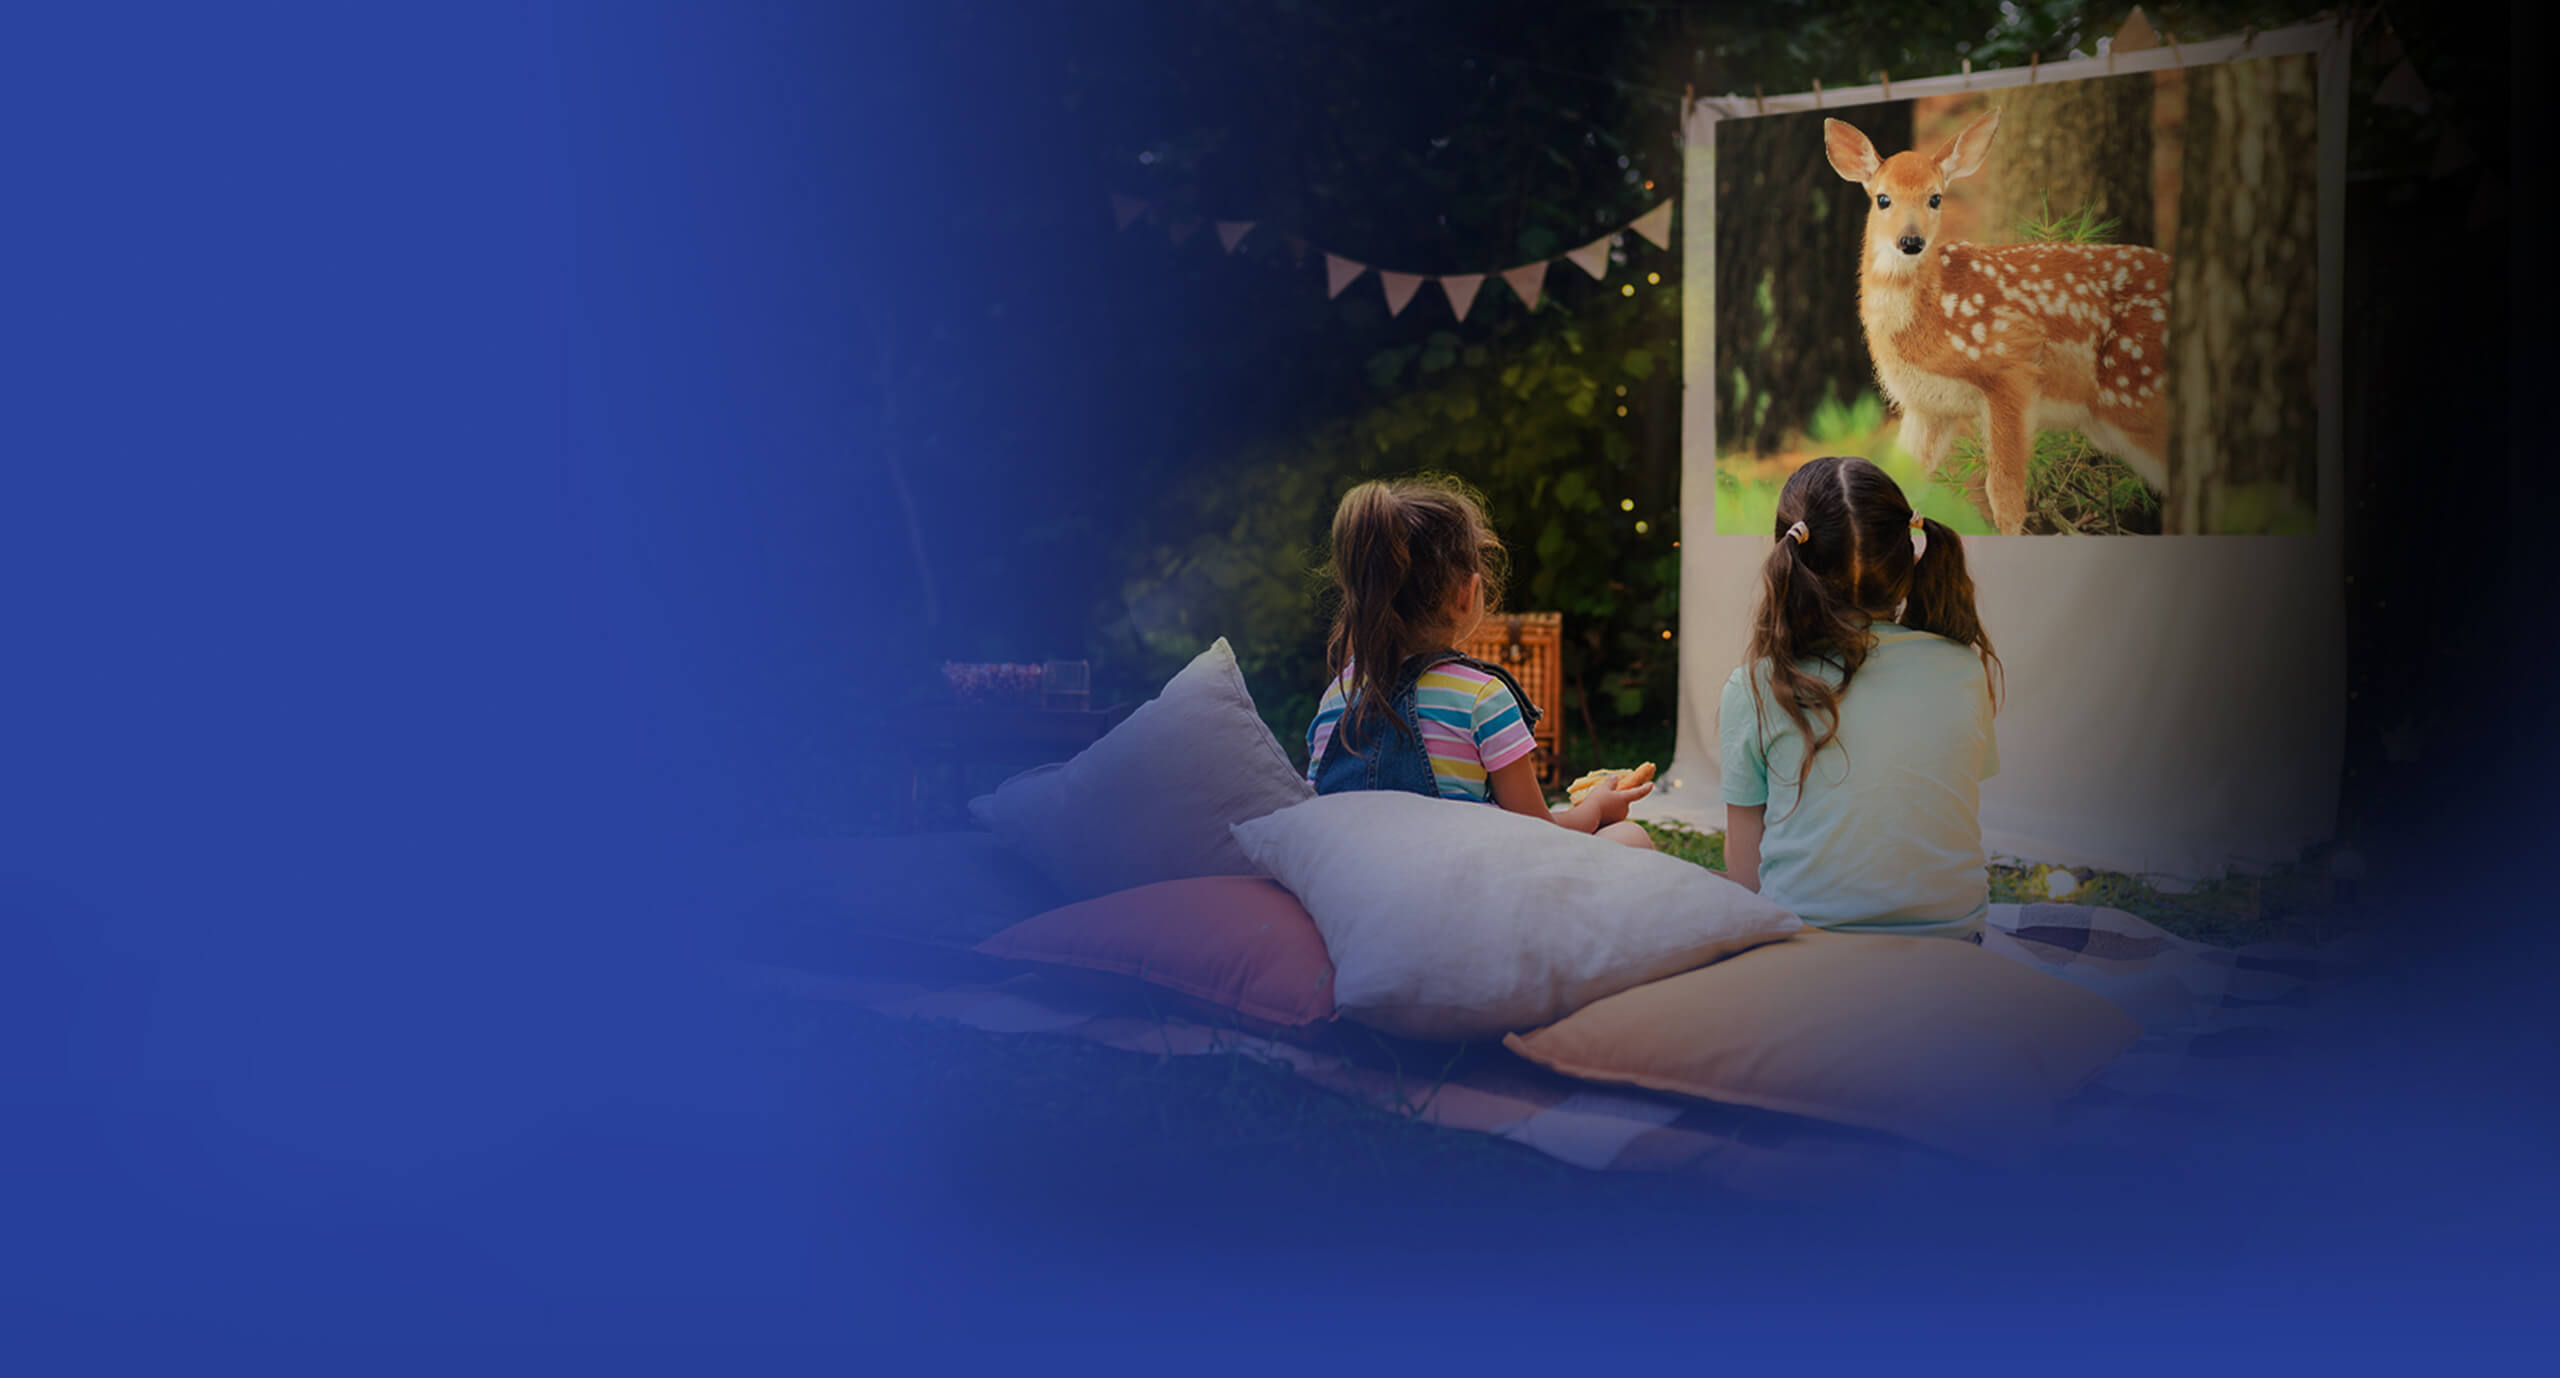 Young girls picnic outside, enjoying an animal related movie content with ASUS ZenBeam L2 smart portable LED projector